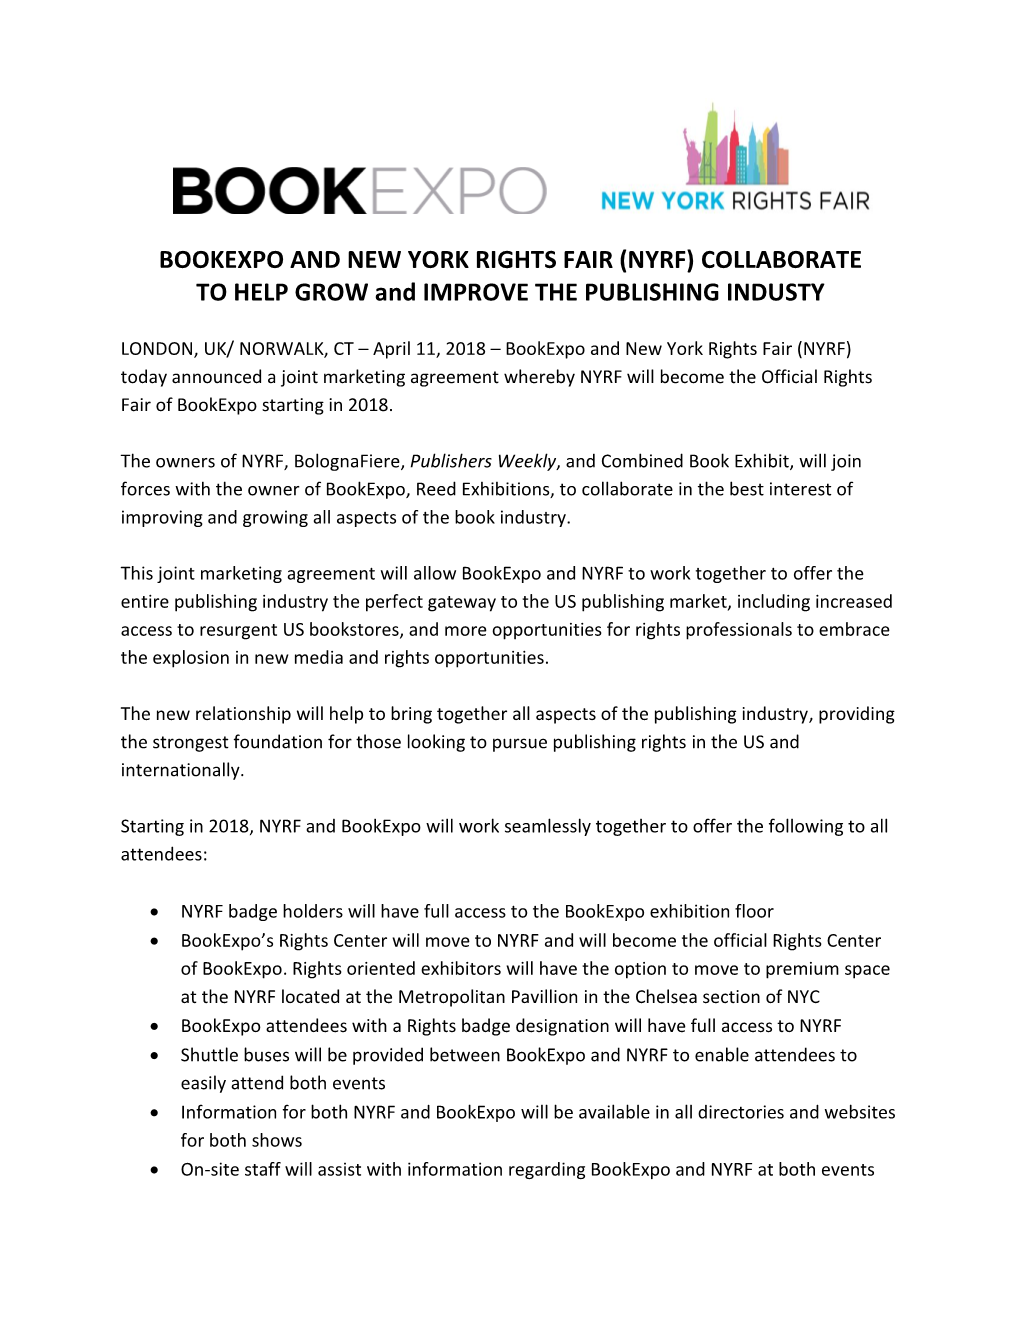 BOOKEXPO and NEW YORK RIGHTS FAIR (NYRF) COLLABORATE to HELP GROW and IMPROVE the PUBLISHING INDUSTY